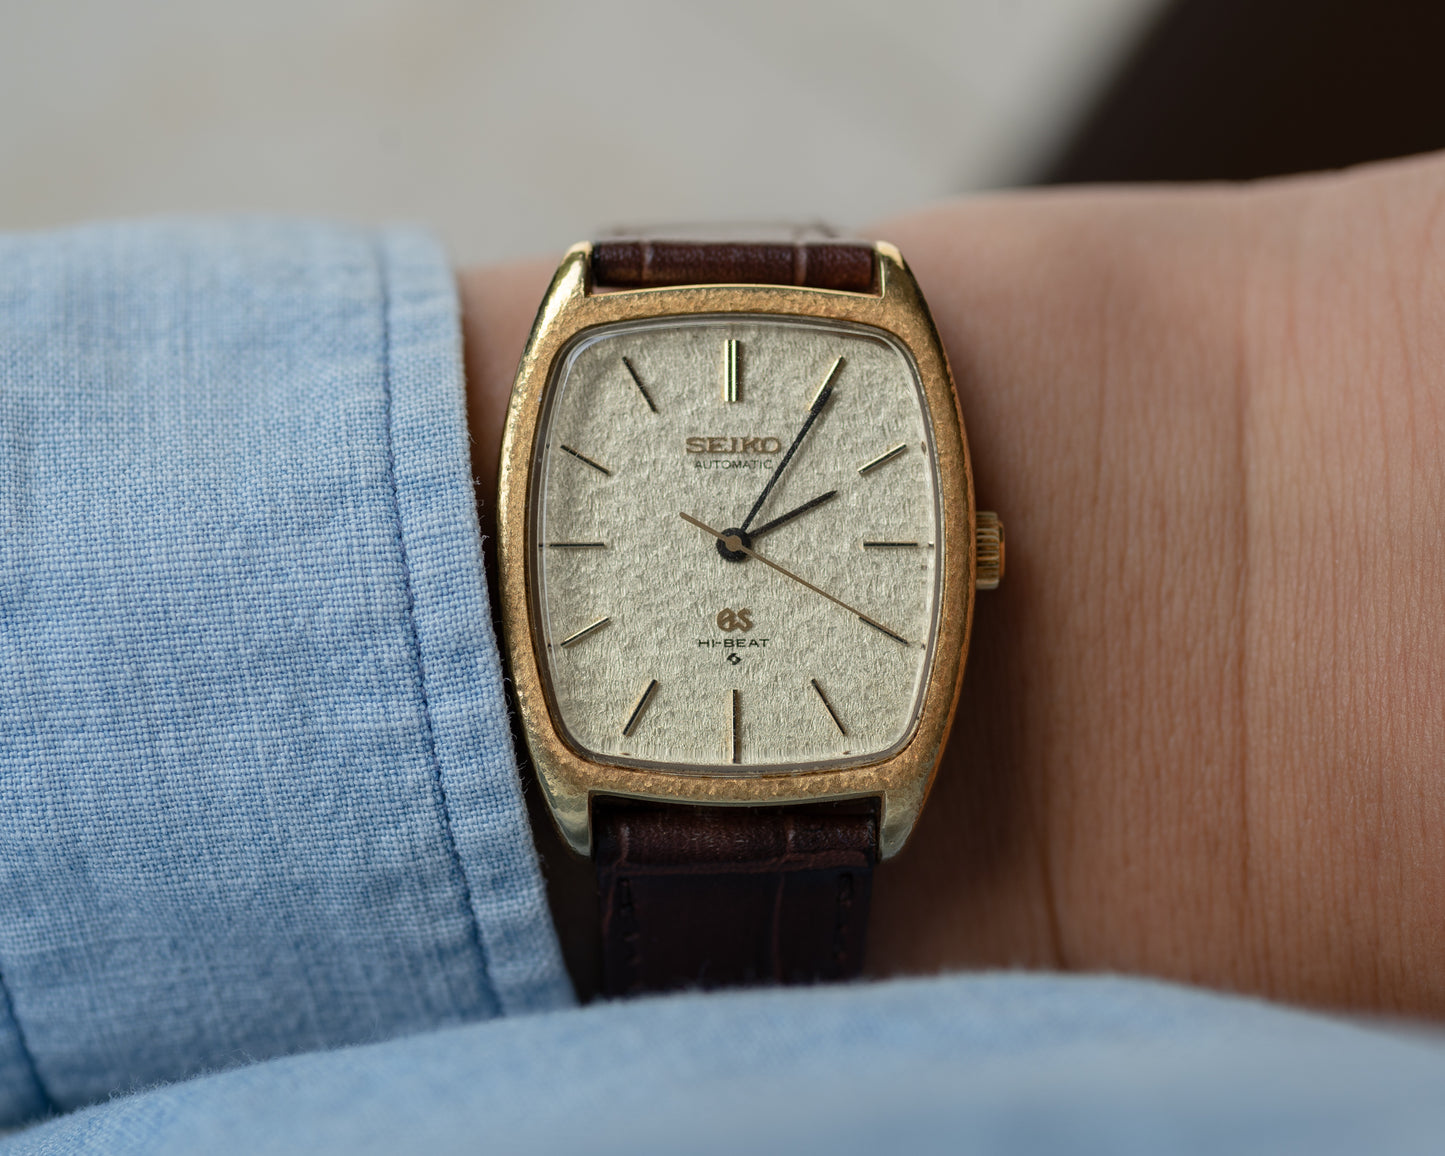 Grand Seiko 5641-5000 "snowflake" dial in 18k gold July 1971